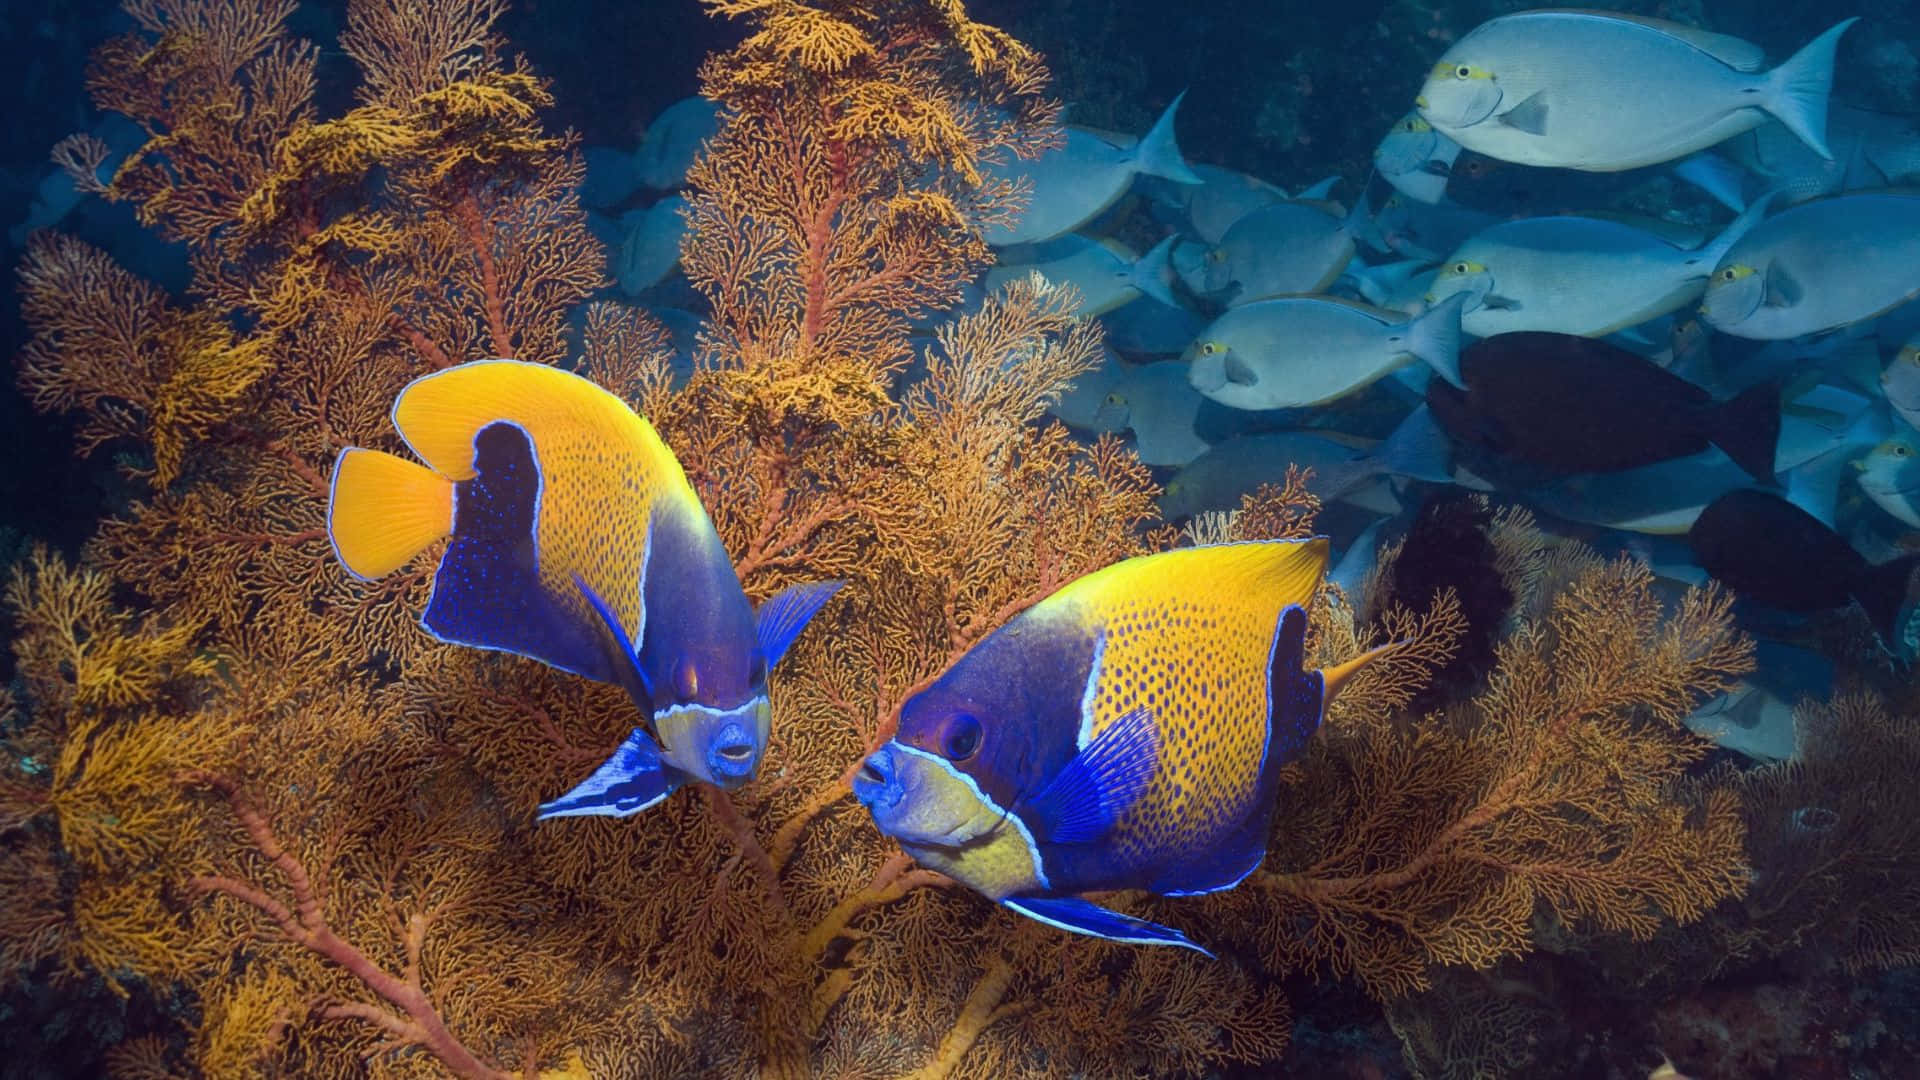 A Vibrant Surgeonfish Exploring The Colorful Coral Reef. Wallpaper